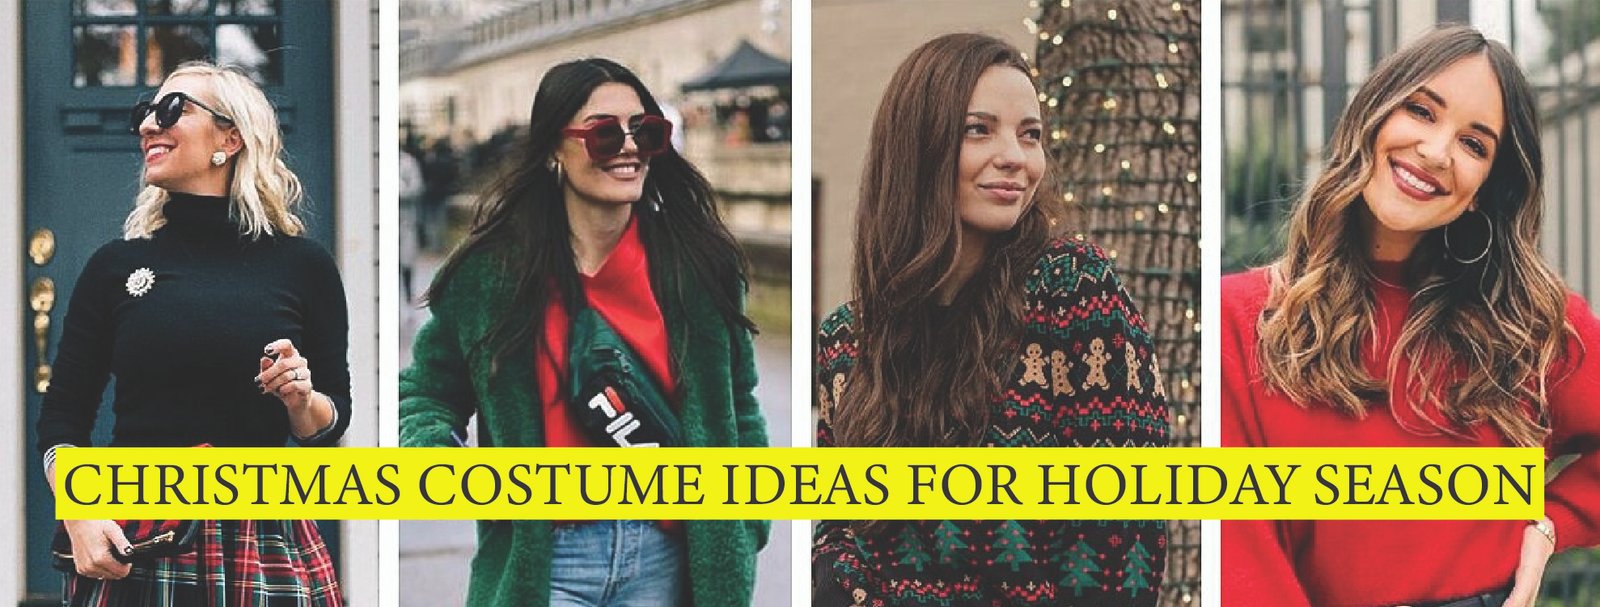 Festive Fashion: Christmas Costume Ideas for the Holiday Season from Celebrity jackets